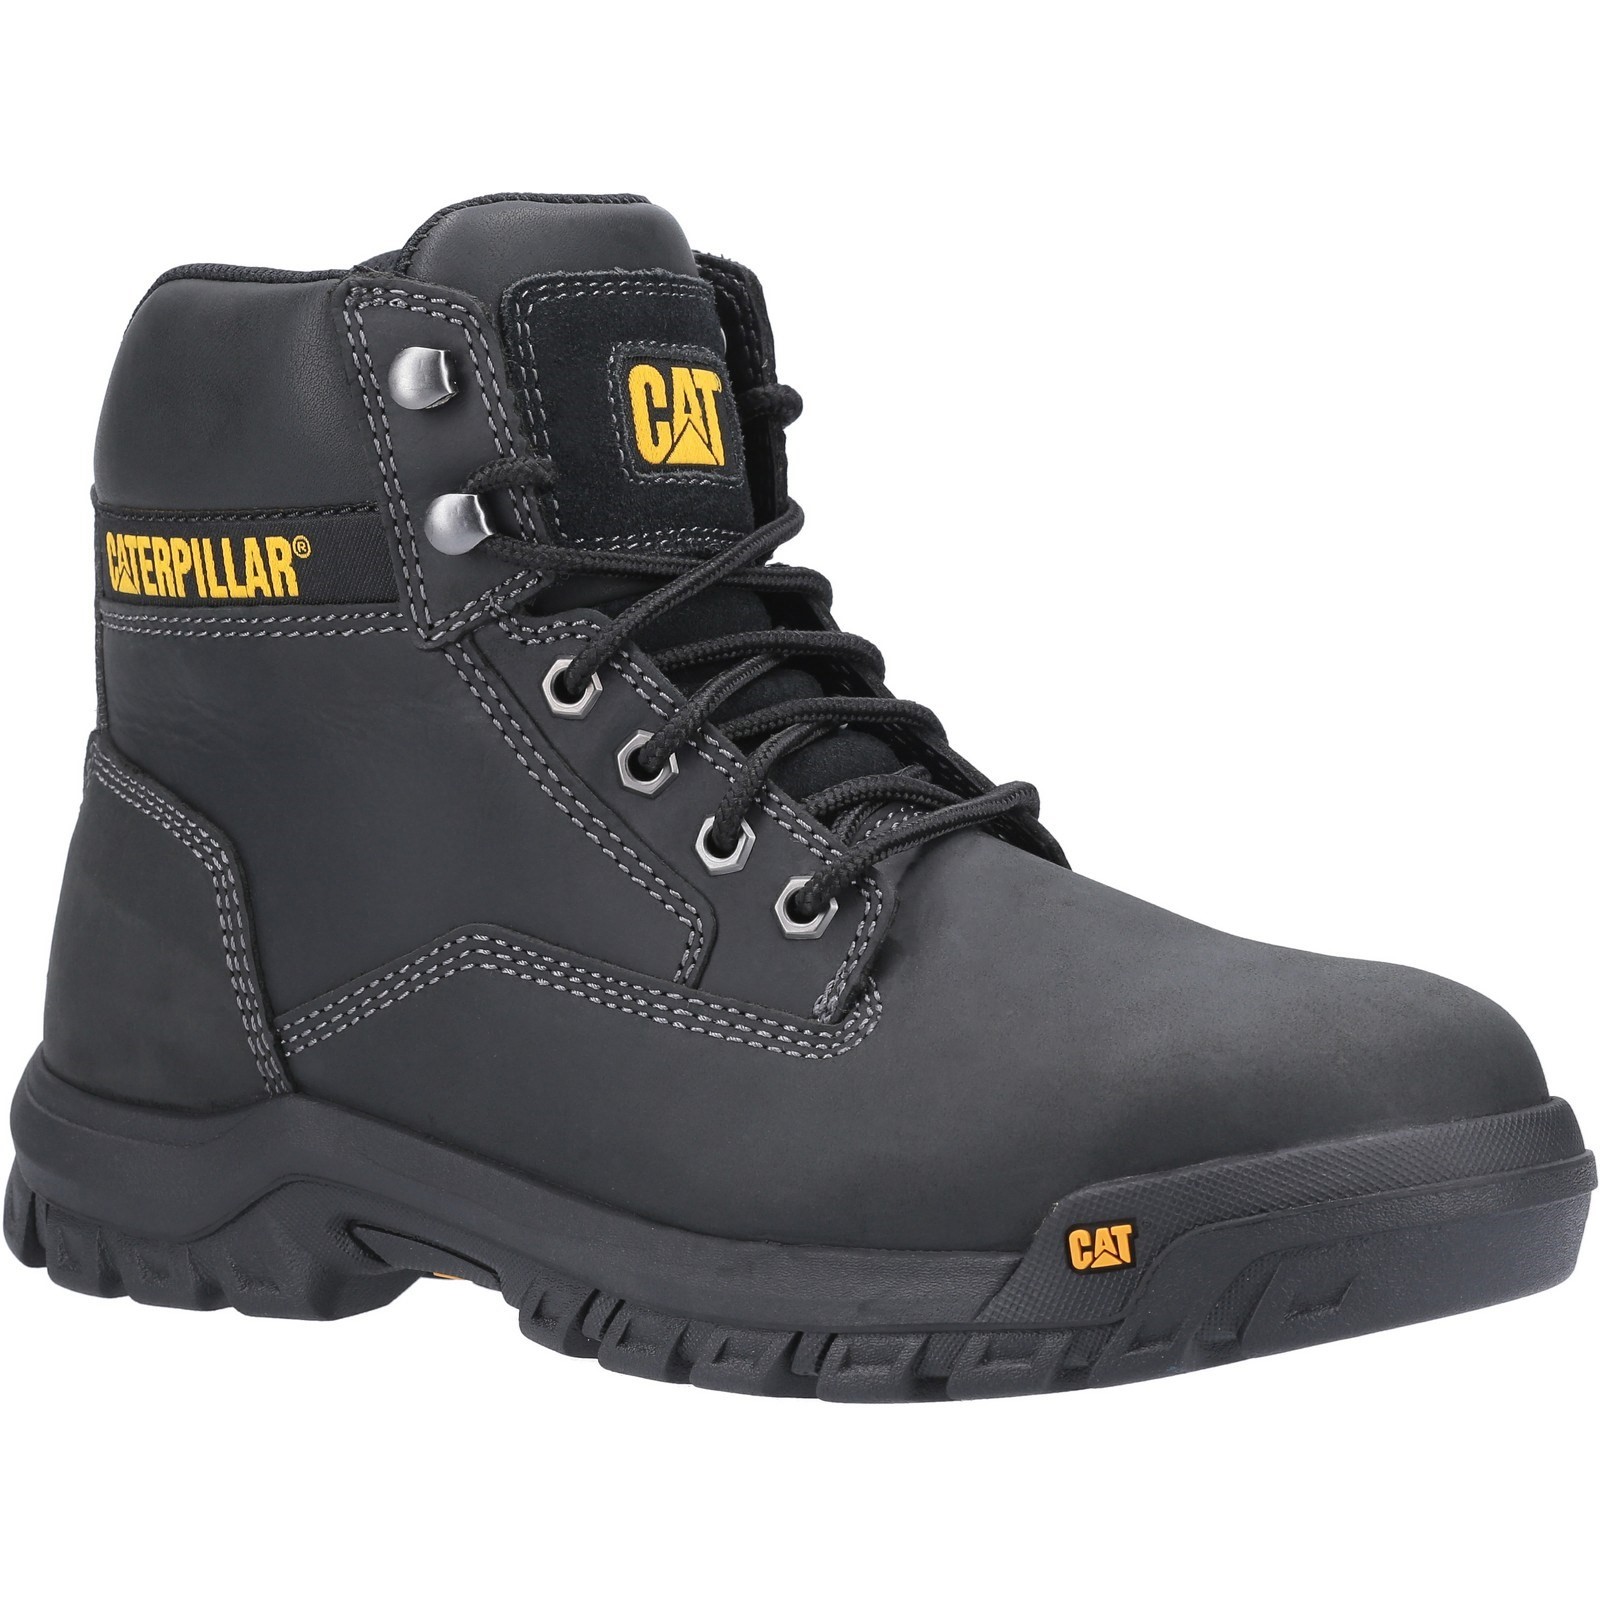 Median S3 Lace Up Safety Boot